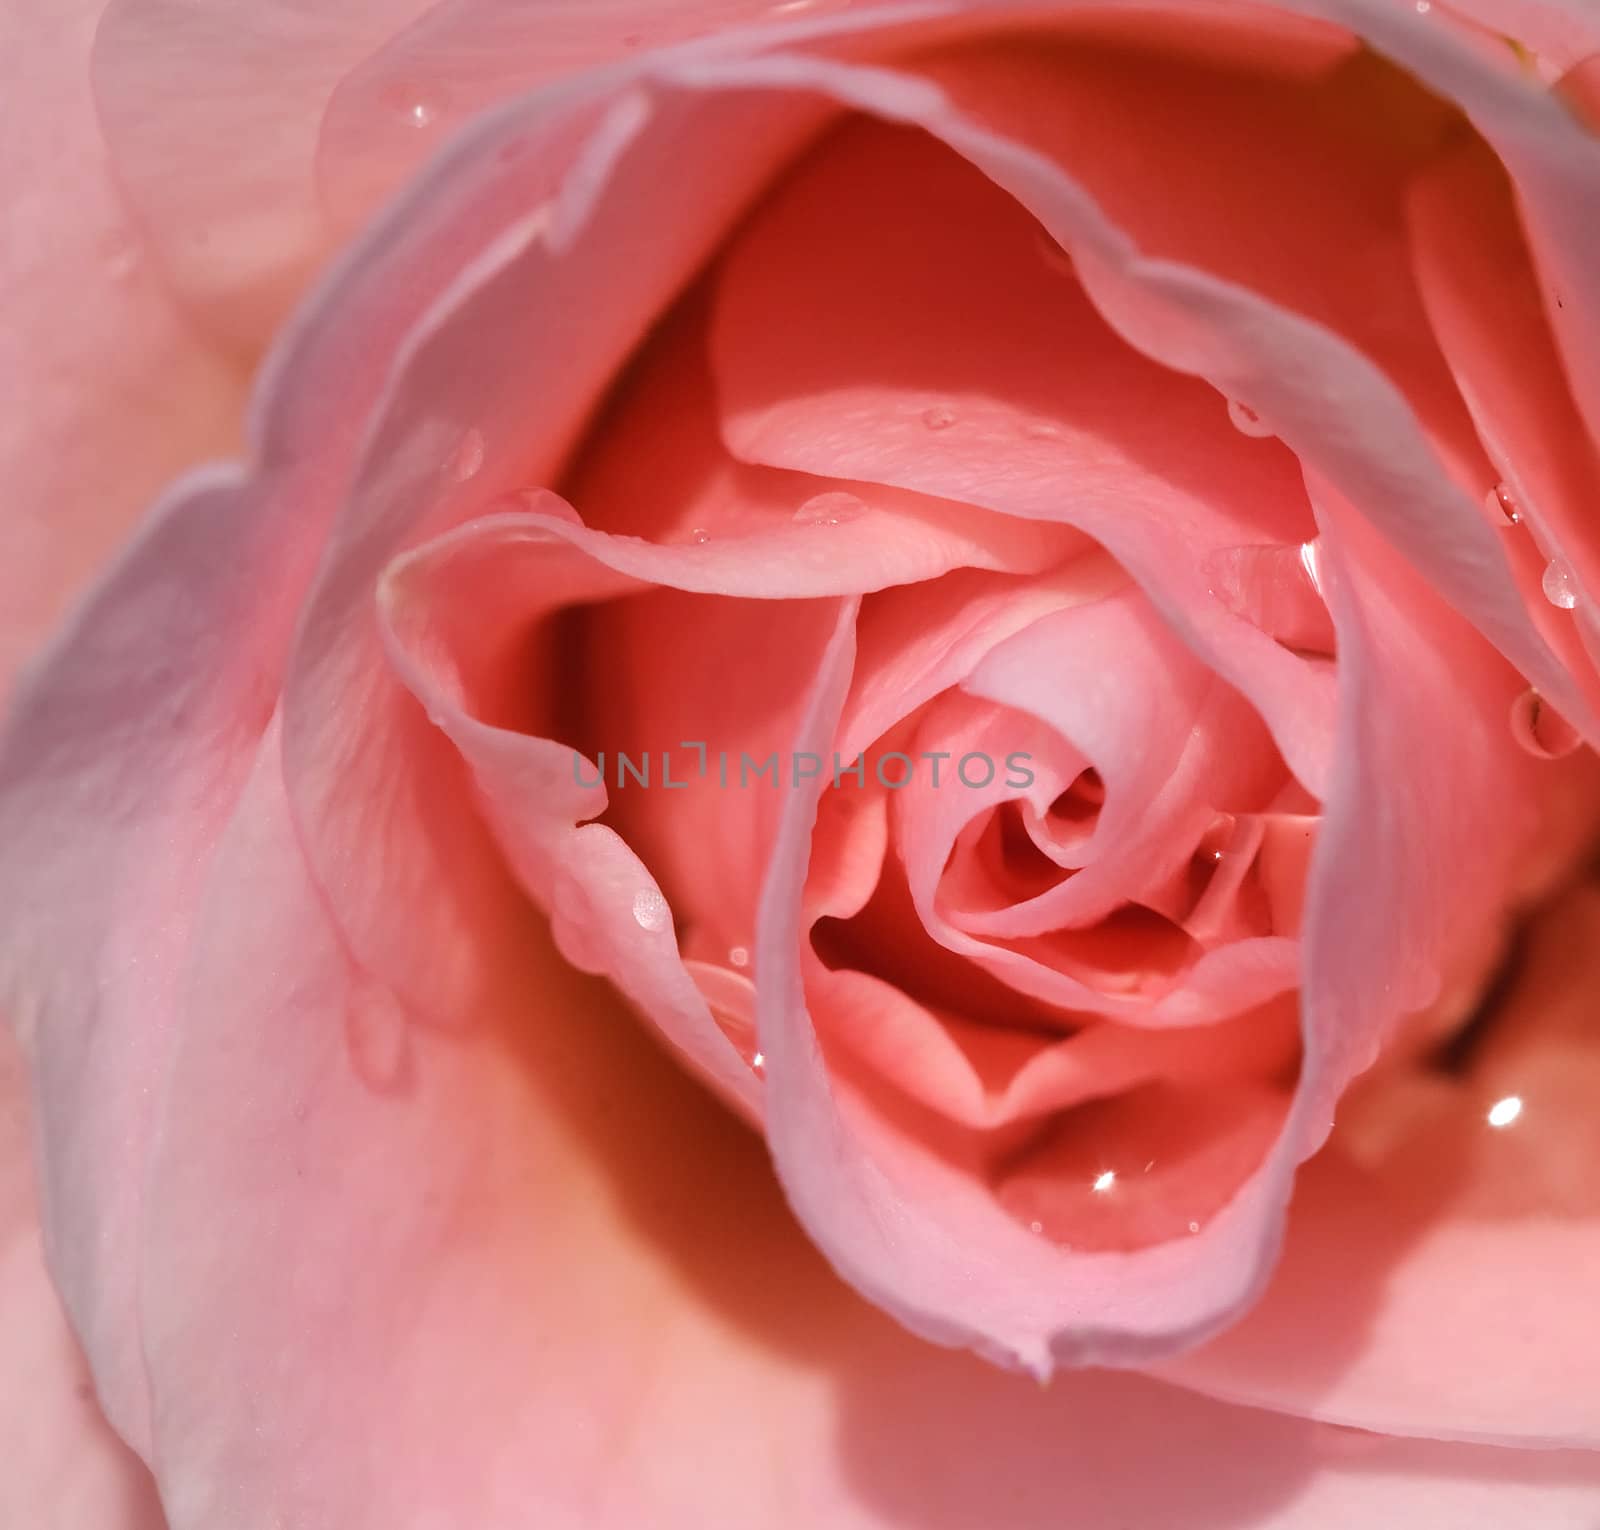 Closeup picture of a pink rose with some water droplets